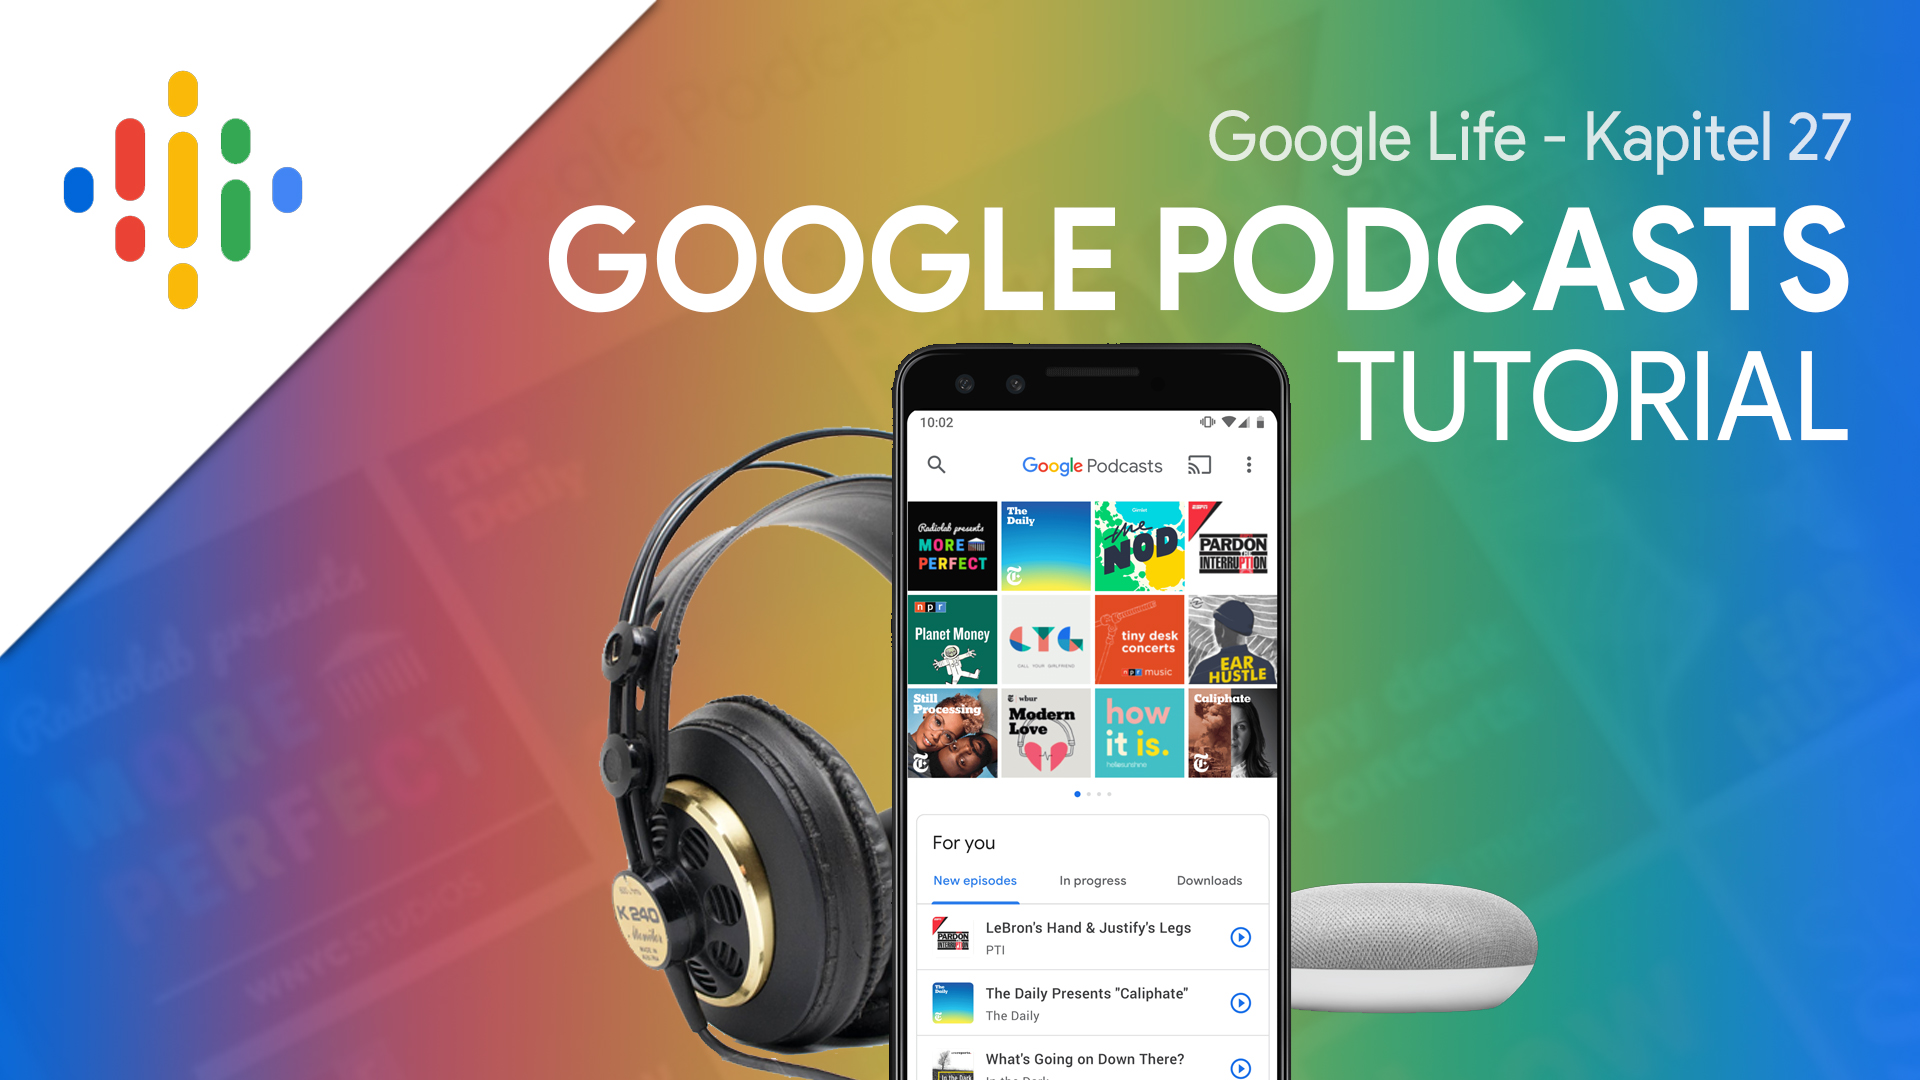 Google Podcasts (Tutorial): Alle Podcasts in einer App 